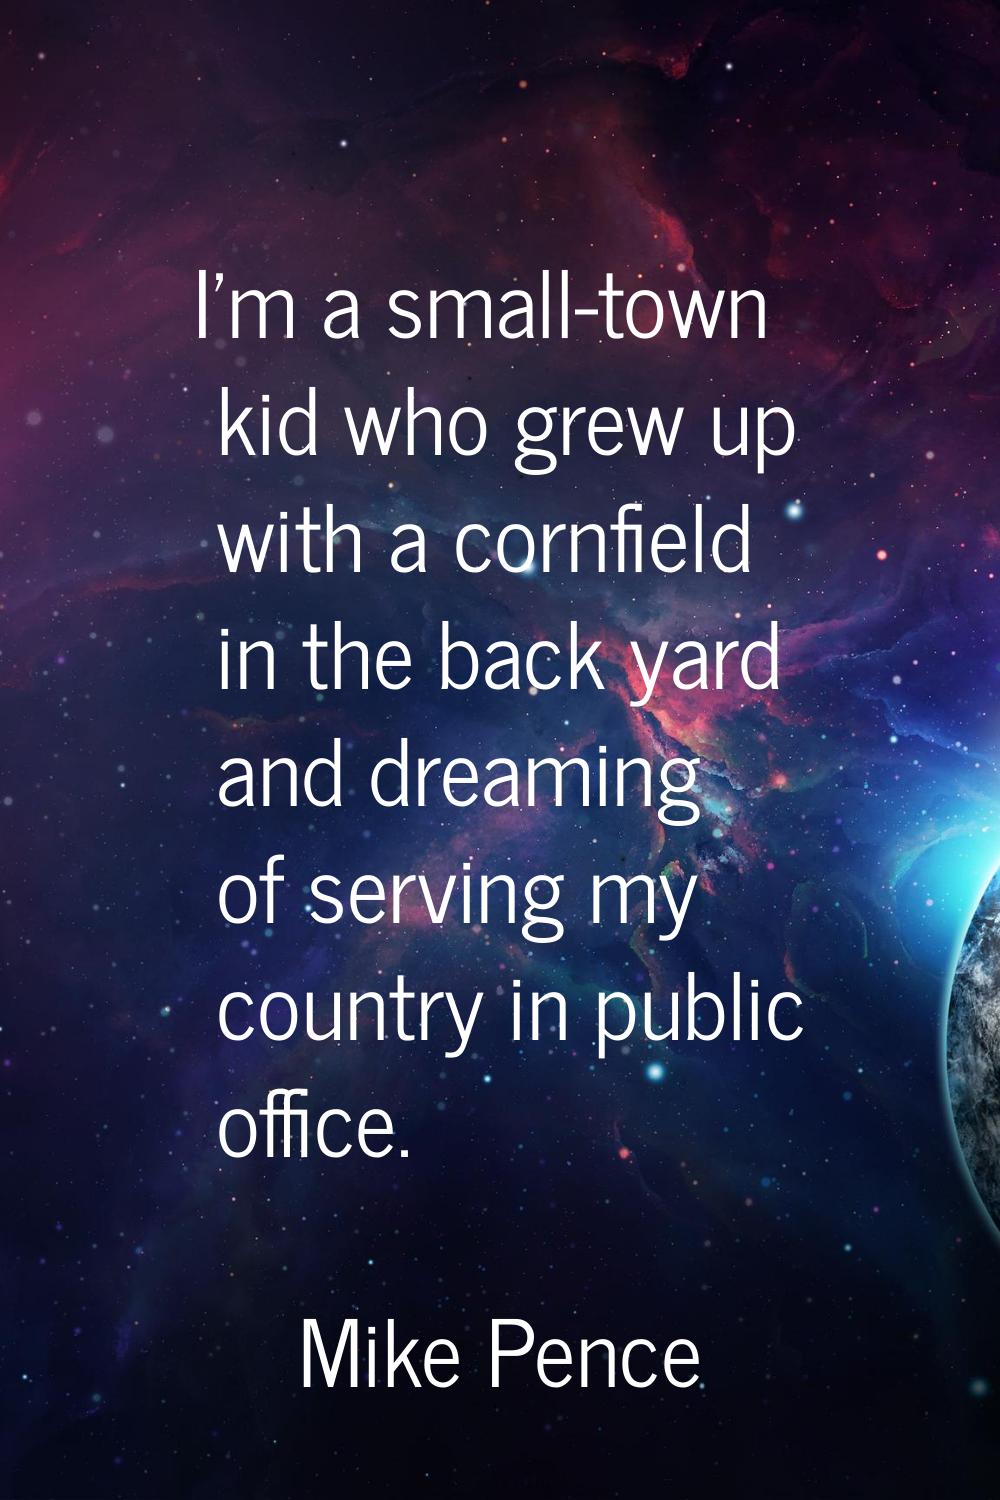 I'm a small-town kid who grew up with a cornfield in the back yard and dreaming of serving my count